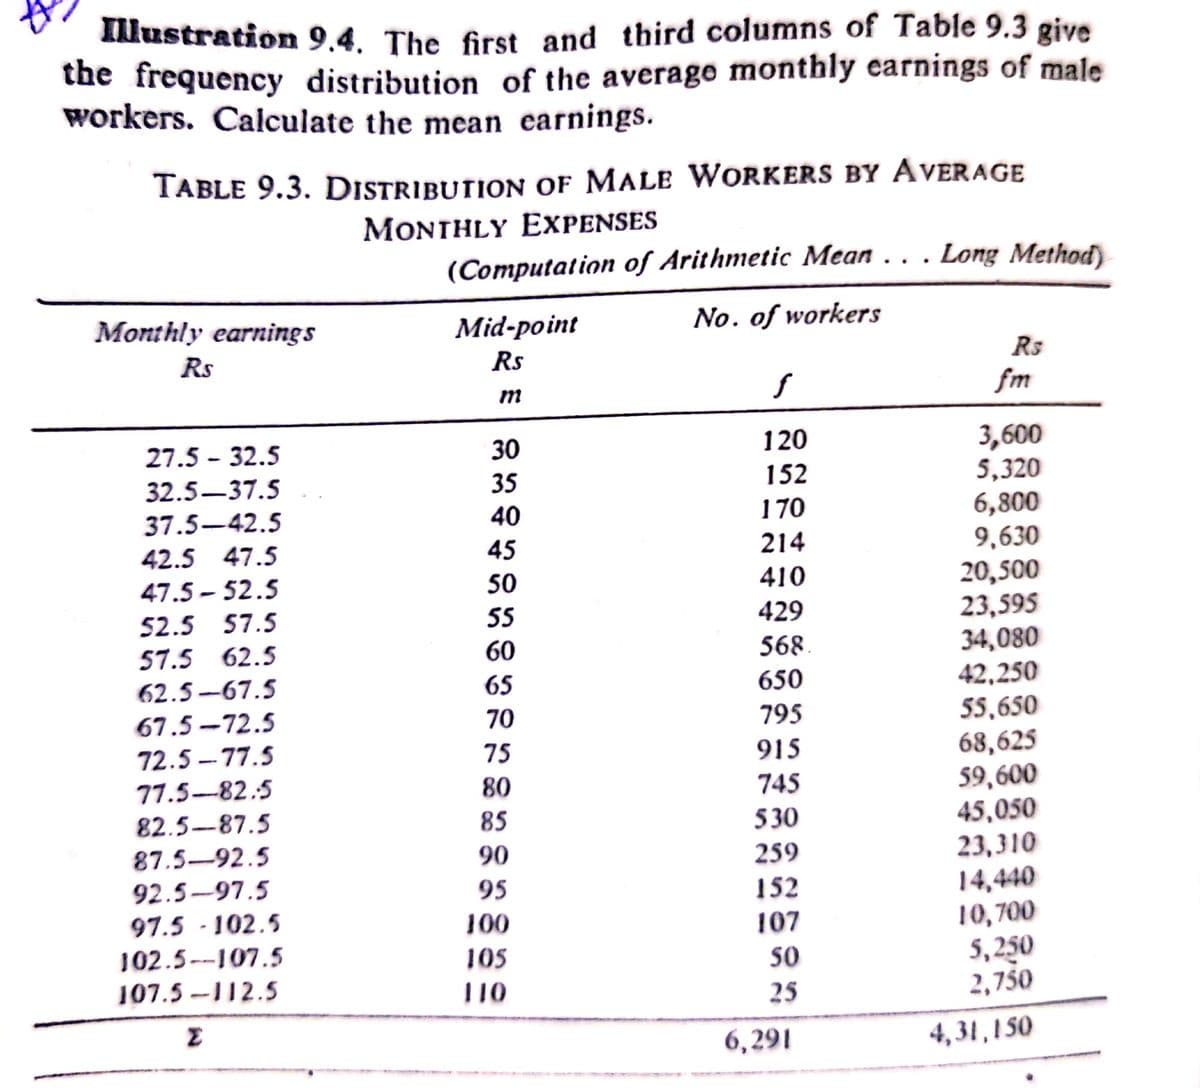 llustration 9.4. The first and third columns of Table 9.3 give
the
frequency distribution of the average monthly earnings of male
workers. Calculate the mean earnings.
TABLE 9.3. DISTRIBUTION OF MALE WORKERS BY AVERAGE
MONIHLY EXPENSES
(Computation of Arithmetic Mean . . . Long Method)
Monthly earnings
Mid-point
No. of workers
Rs
Rs
Rs
m
fm
3,600
5,320
6,800
9,630
20,500
23,595
34,080
42,250
27.5 - 32.5
30
120
32.5–37.5
35
152
37.5–42.5
40
170
42.5 47.5
45
214
47.5 – 52.5
50
410
52.5 57.5
55
429
57.5 62.5
60
568.
62.5-67.5
65
650
55,650
68,625
59,600
45,050
23,310
14,440
10,700
5,250
2,750
67.5 -72.5
70
795
72.5 -77.5
77.5-82.5
75
915
80
745
82.5-87.5
85
530
87.5-92.5
90
259
92.5-97.5
95
152
97.5 - 102.5
100
107
102.5--107.5
105
SO
107.5 -112.5
110
25
Σ
6,291
4, 31,1 50
